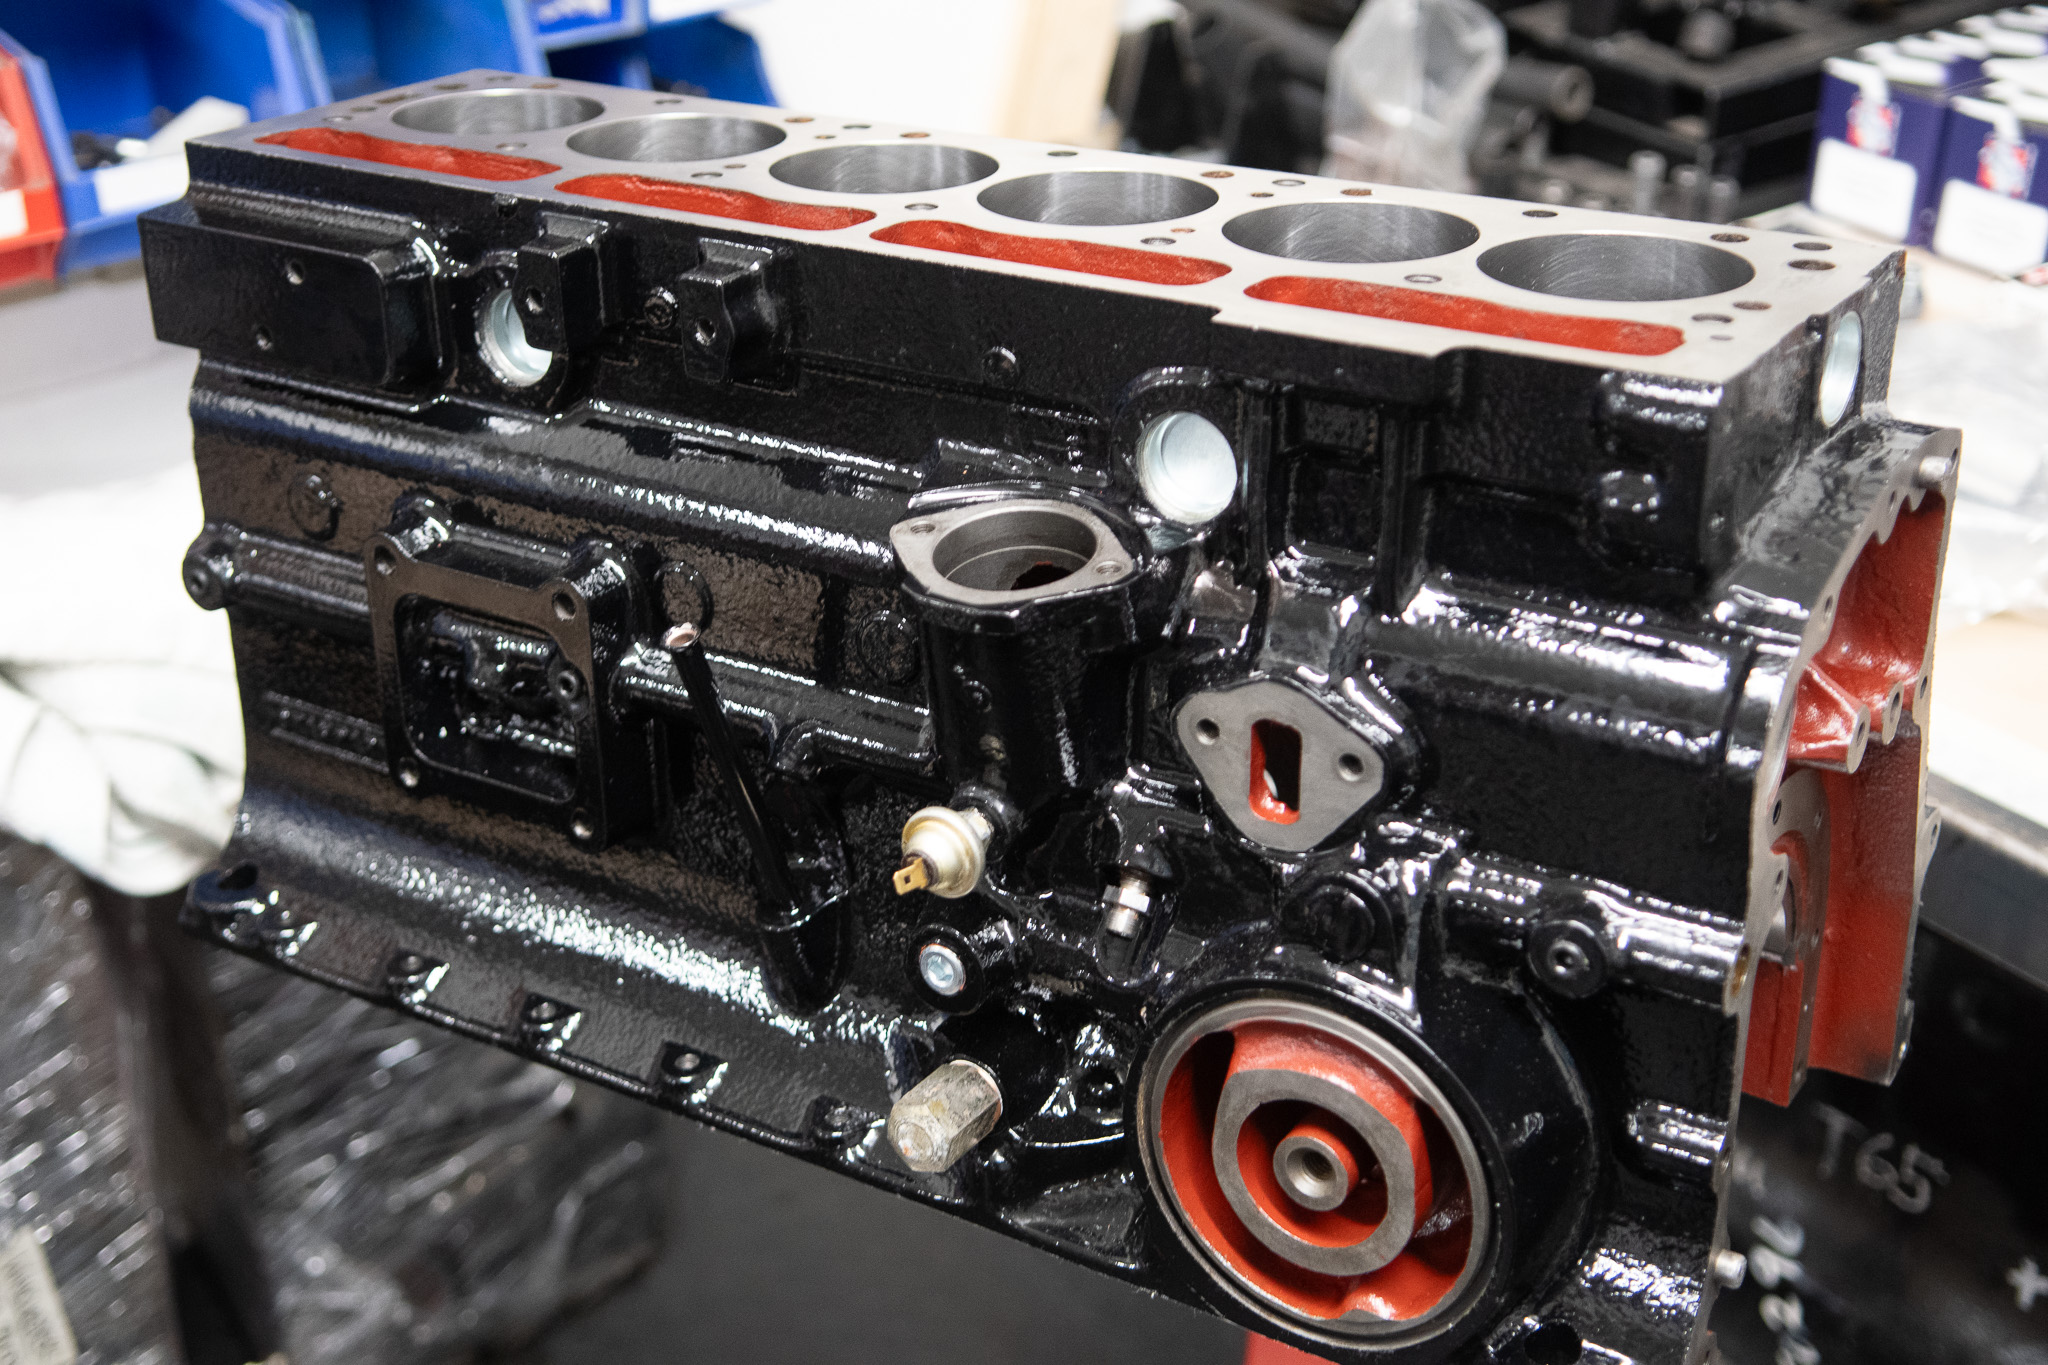 A close-up image of a clean, black and red engine block placed on a workshop bench. The engine block has six cylinders and various components and openings visible. The background shows shelves with tools and mechanical parts.